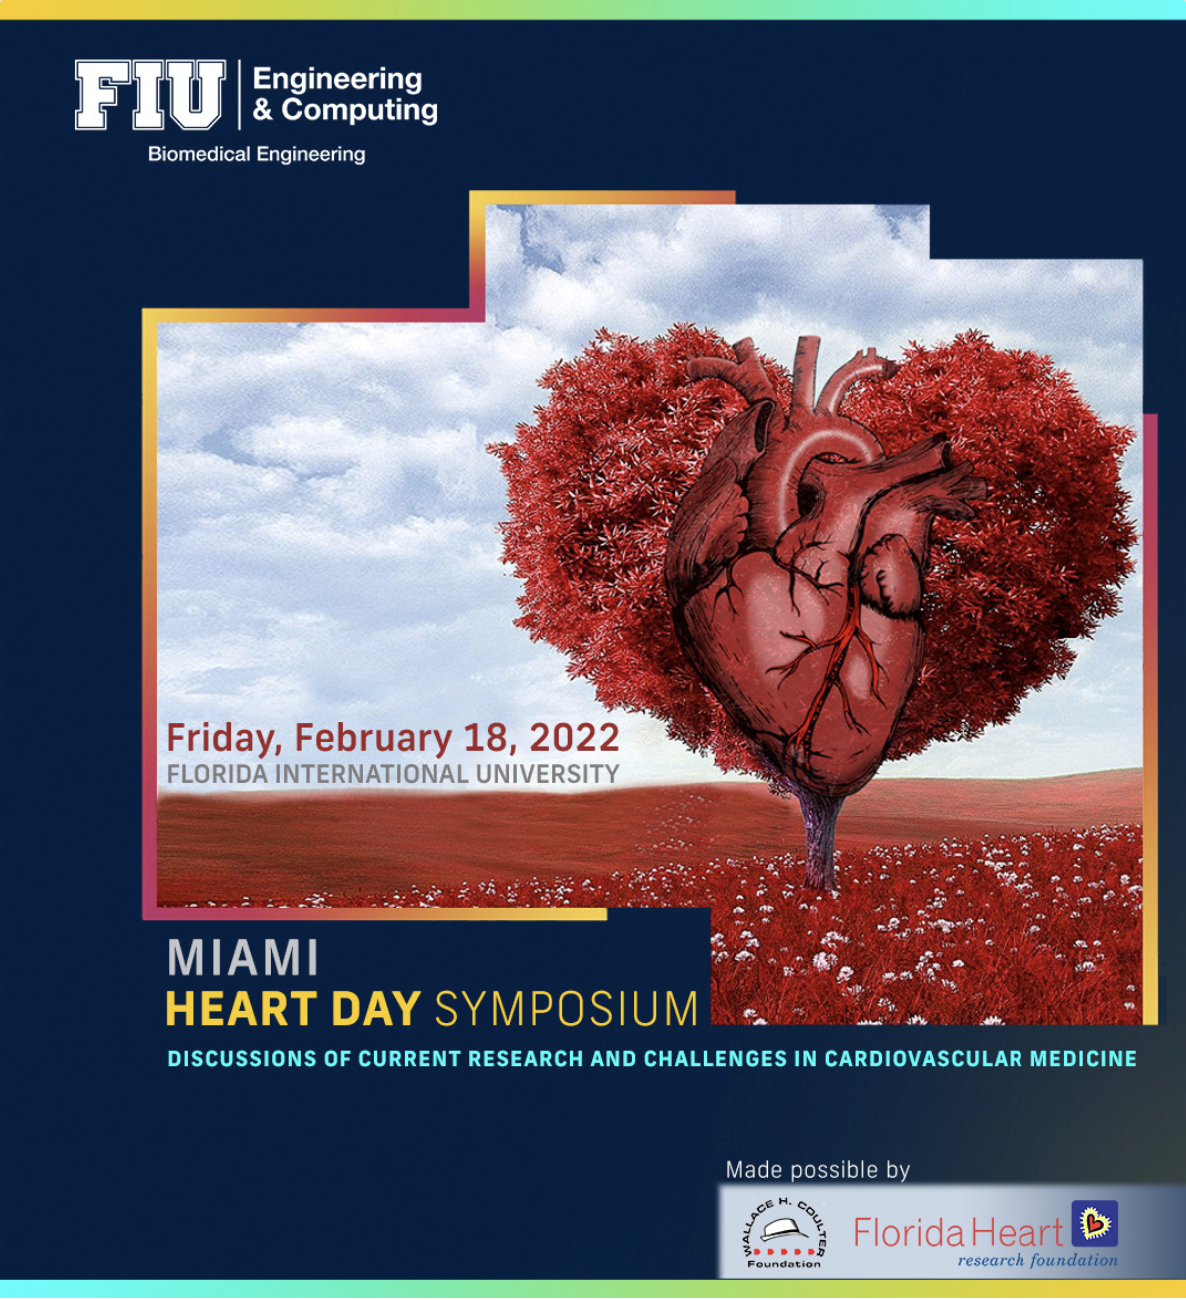 Annual Heart Day Symposium